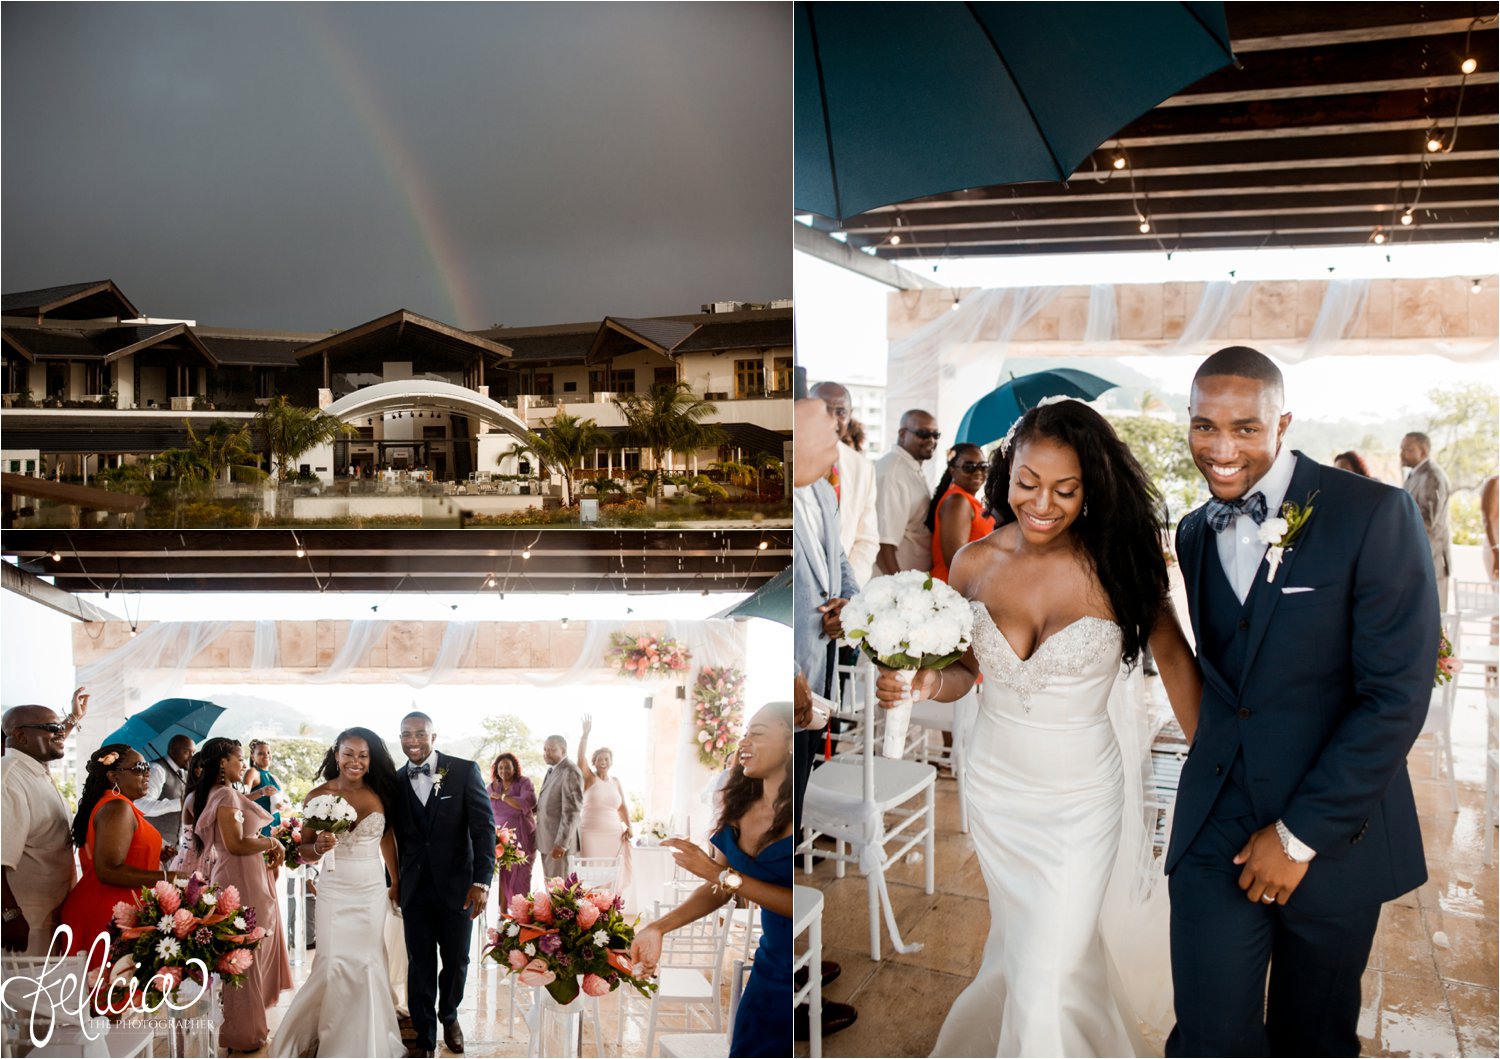   images by feliciathephotographer.com | destination wedding photographer | st lucia | l&s travel | the Royalton | ceremony | first kiss | exchanging vows | details | tropical | palm trees | navy suit | white satin gown | venue | rainbow | mr and mrs | 